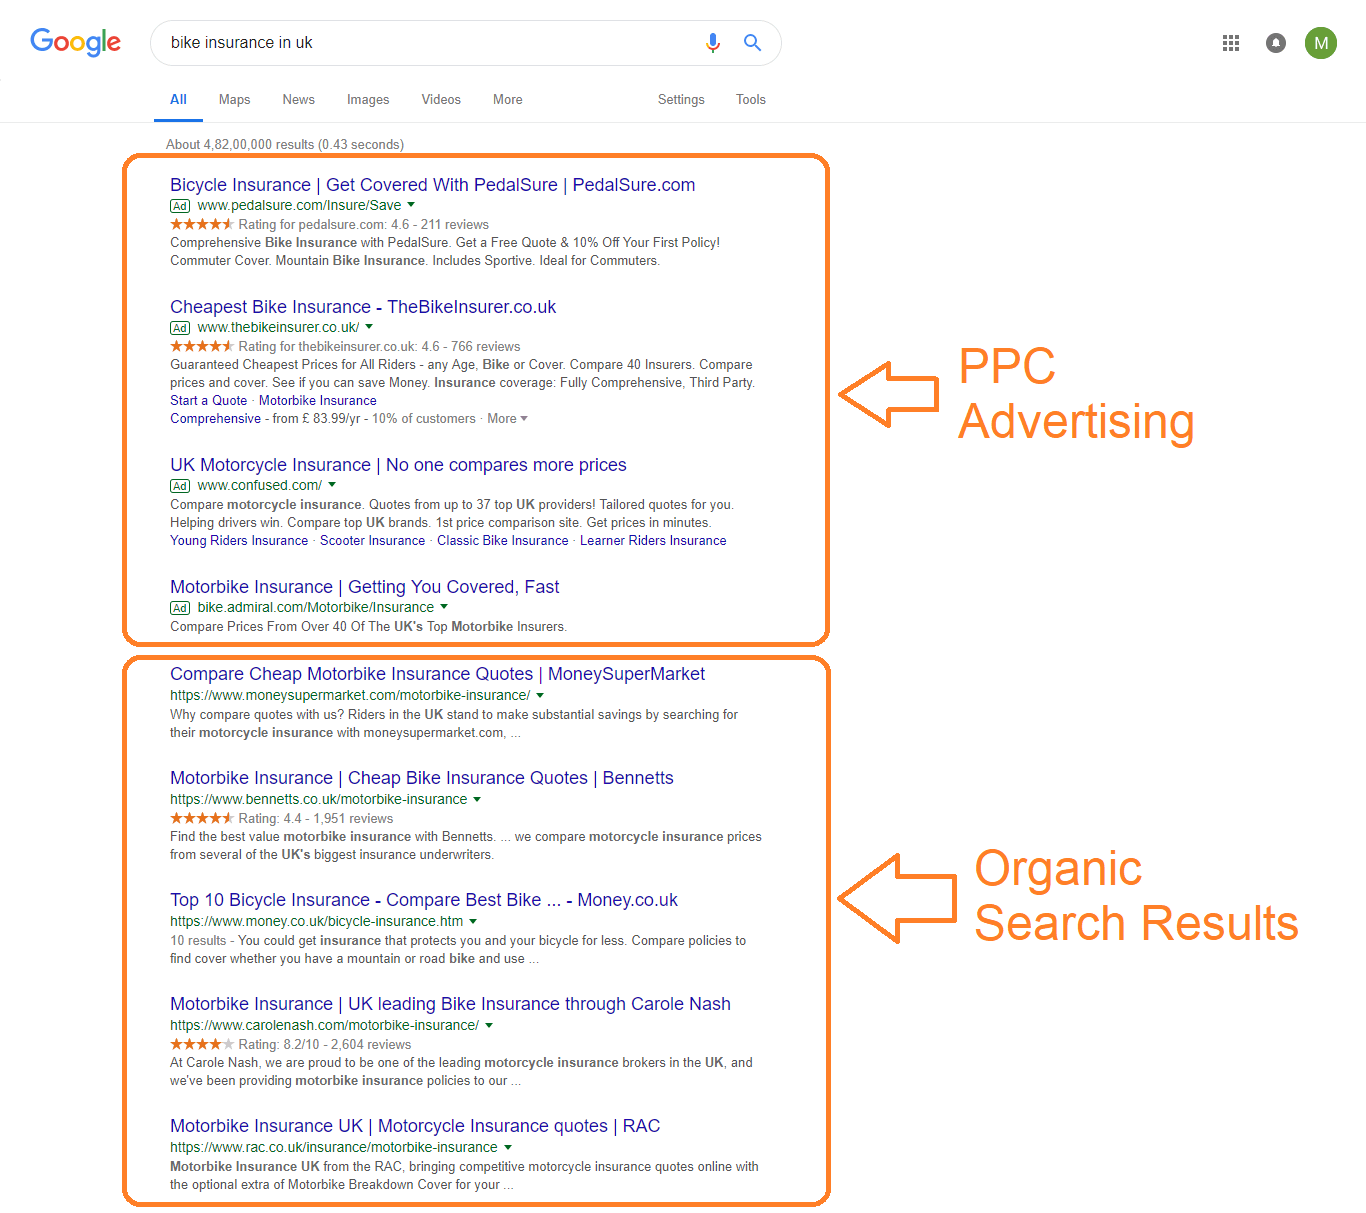 seo-ppc-adwords-difference-results